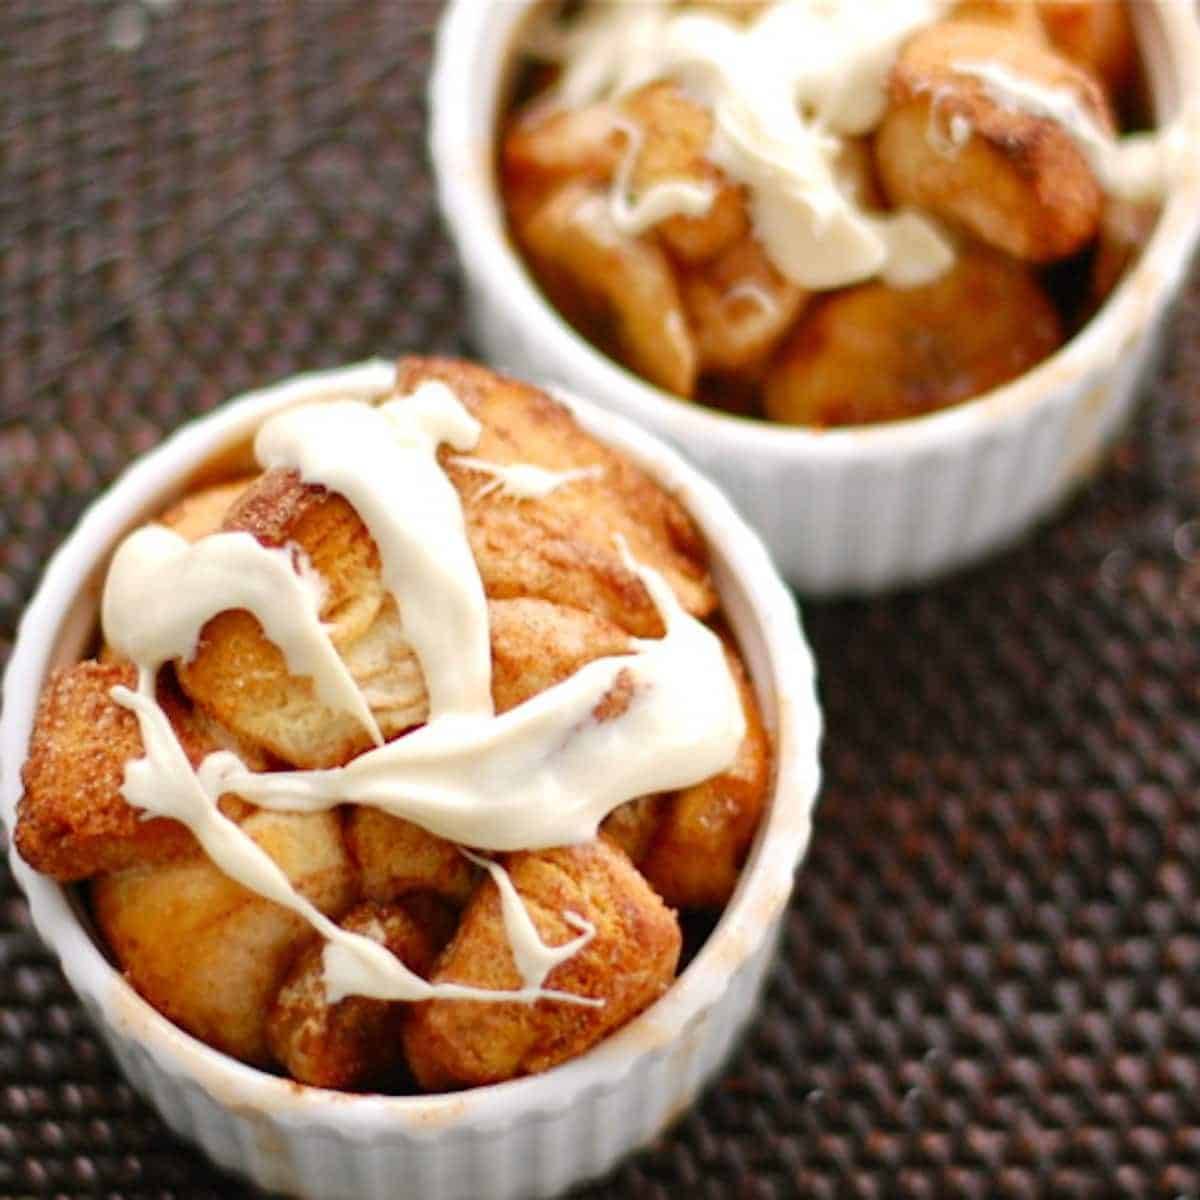 Banana monkey bread in small white dishes with frosting drizzle.